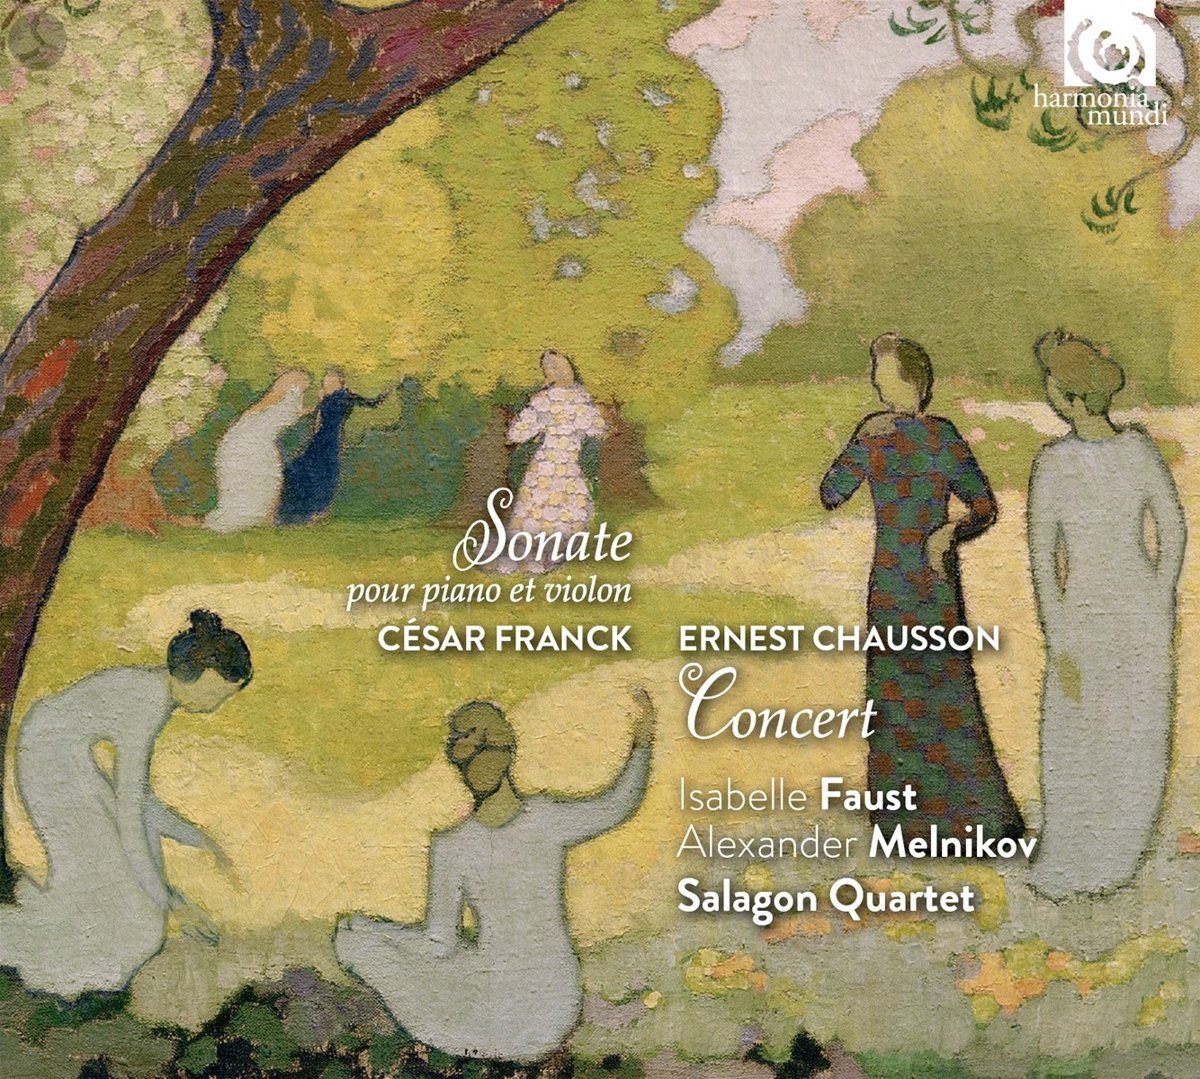 Sonata for Piano and Violin | Cesar Franck, Ernest Chausson, Alexander Melnikov, Isabelle Faust